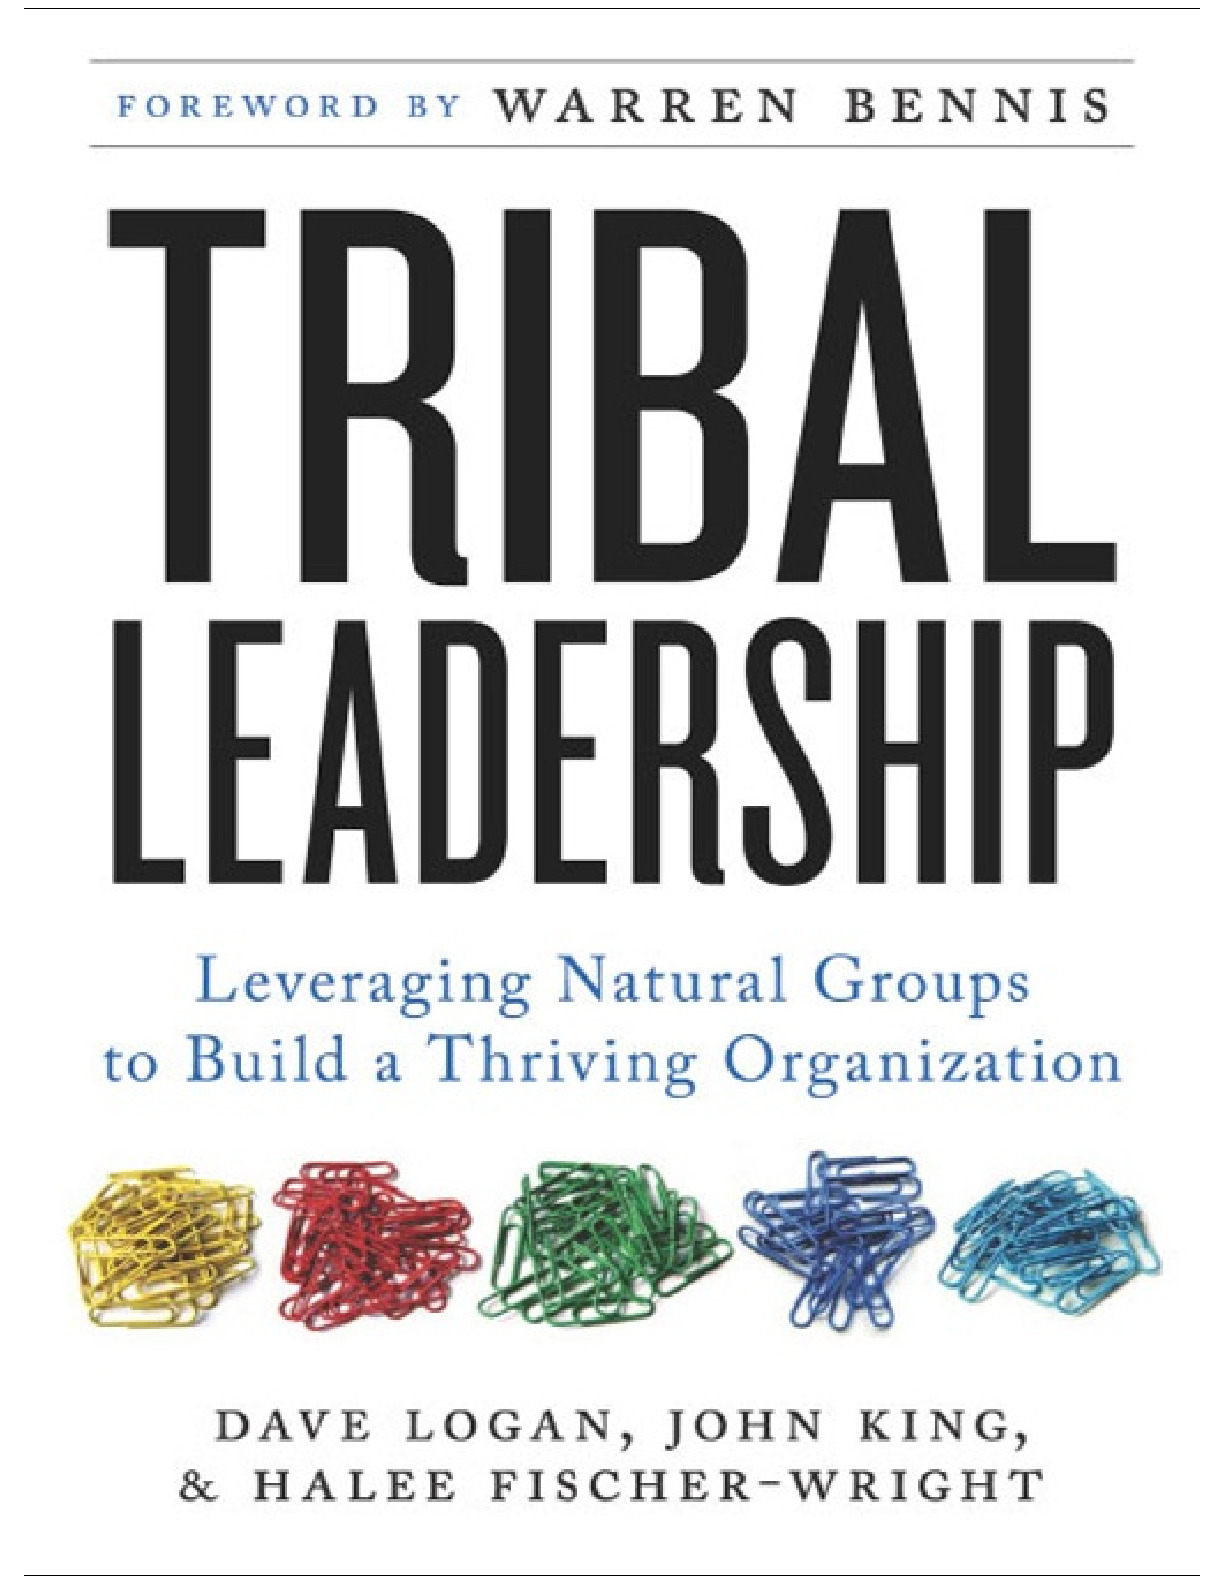 Leveraging Natural Groups to Build a Thriving Organization